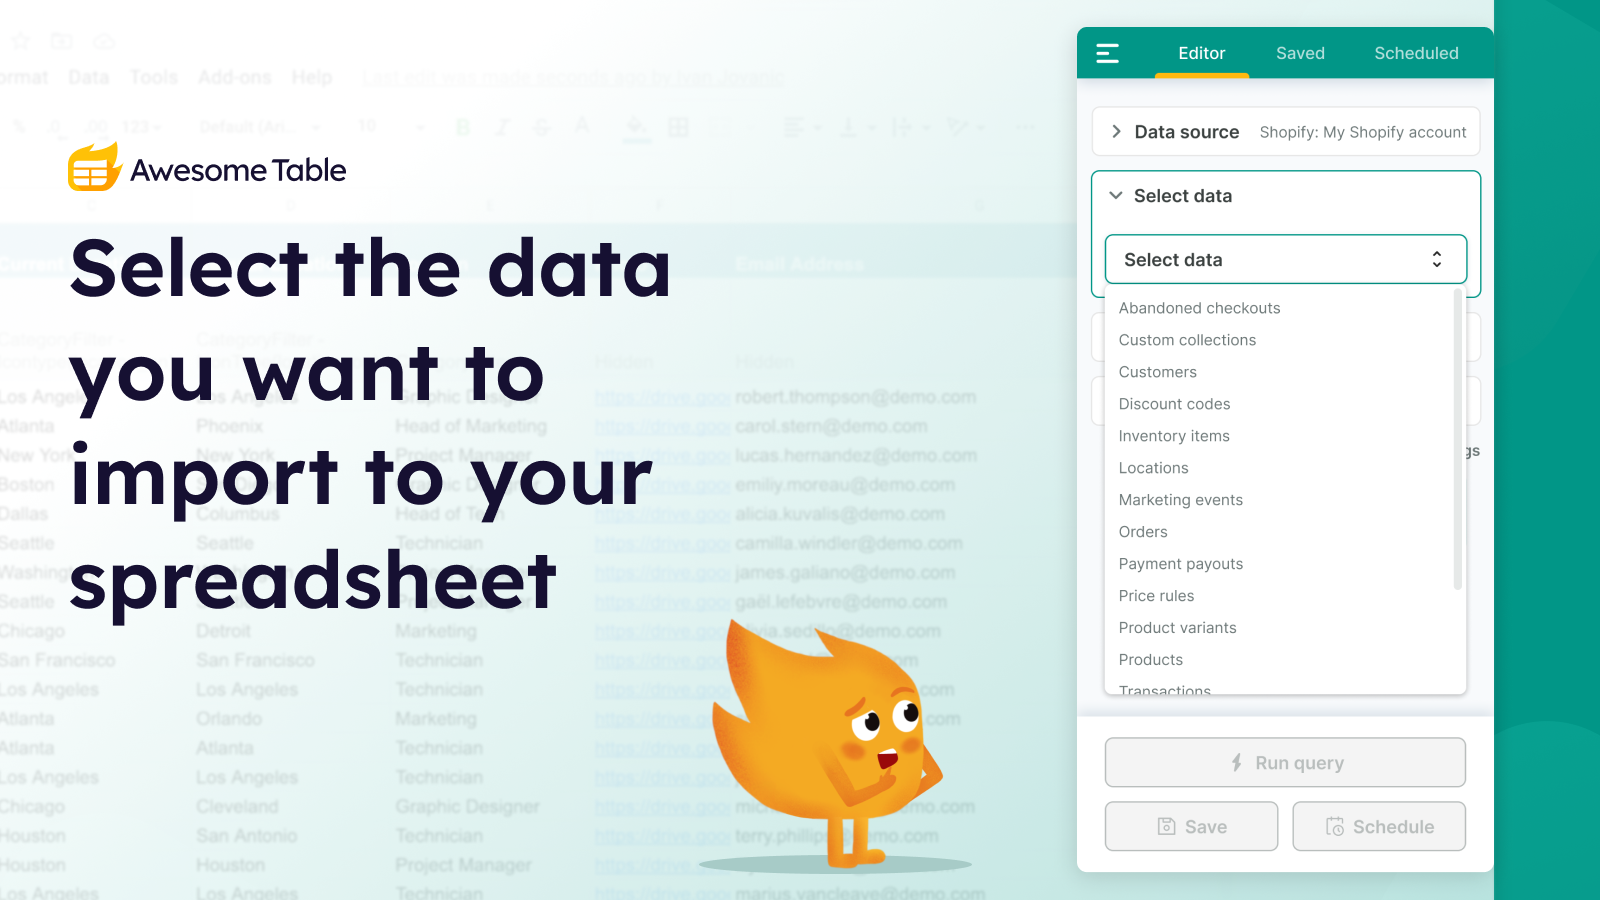 Select the data you want to import to your spreadsheet